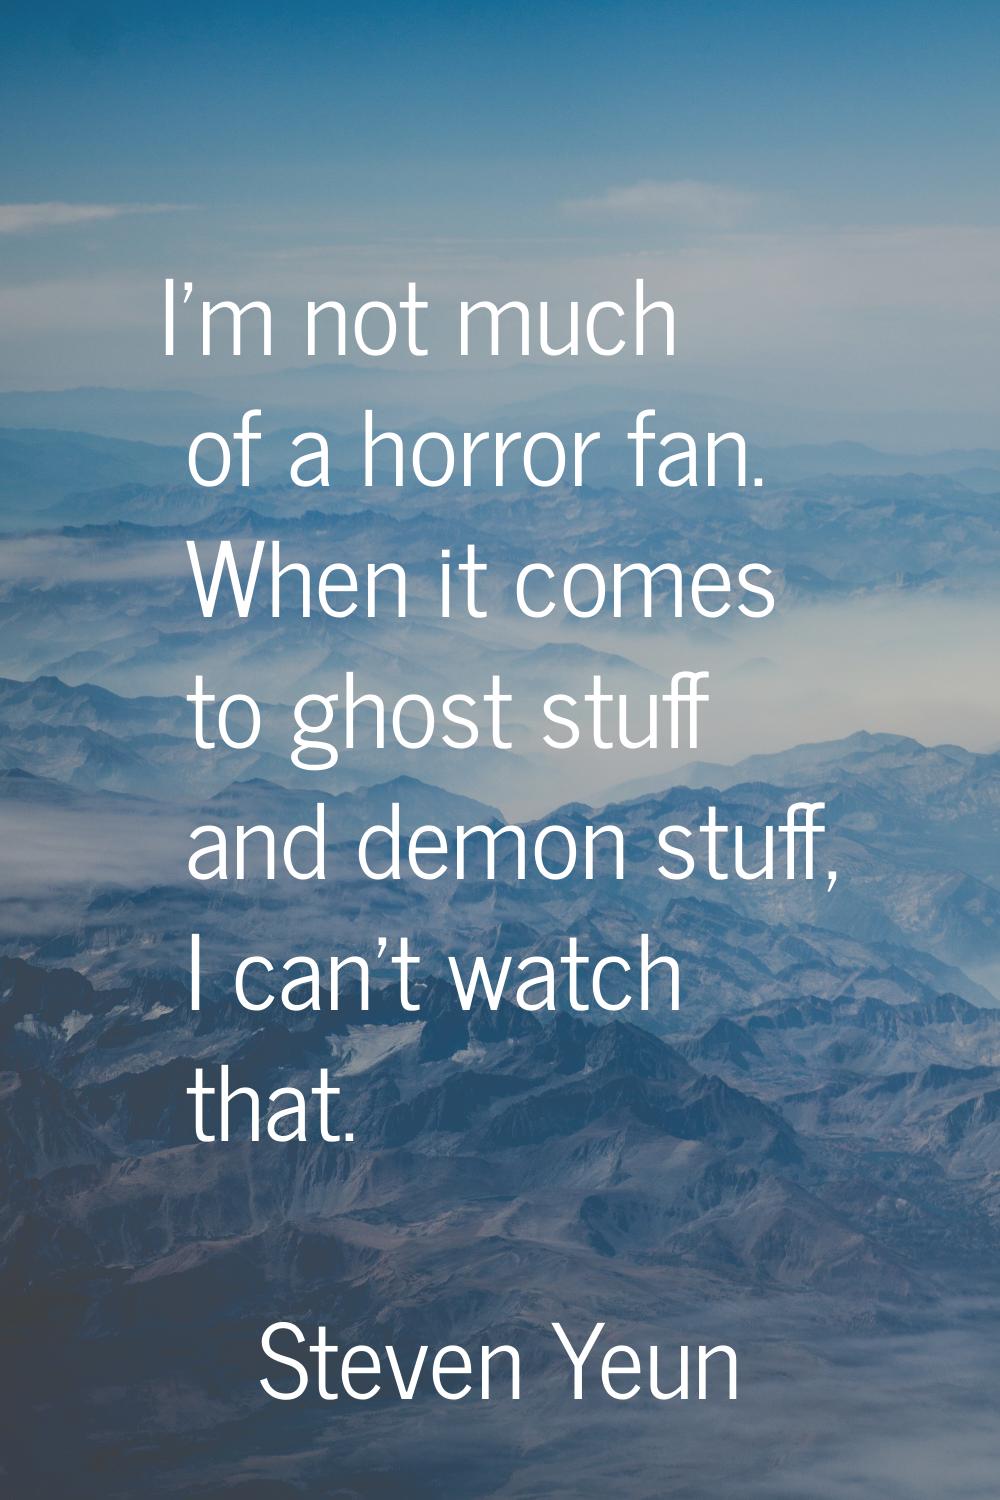 I'm not much of a horror fan. When it comes to ghost stuff and demon stuff, I can't watch that.